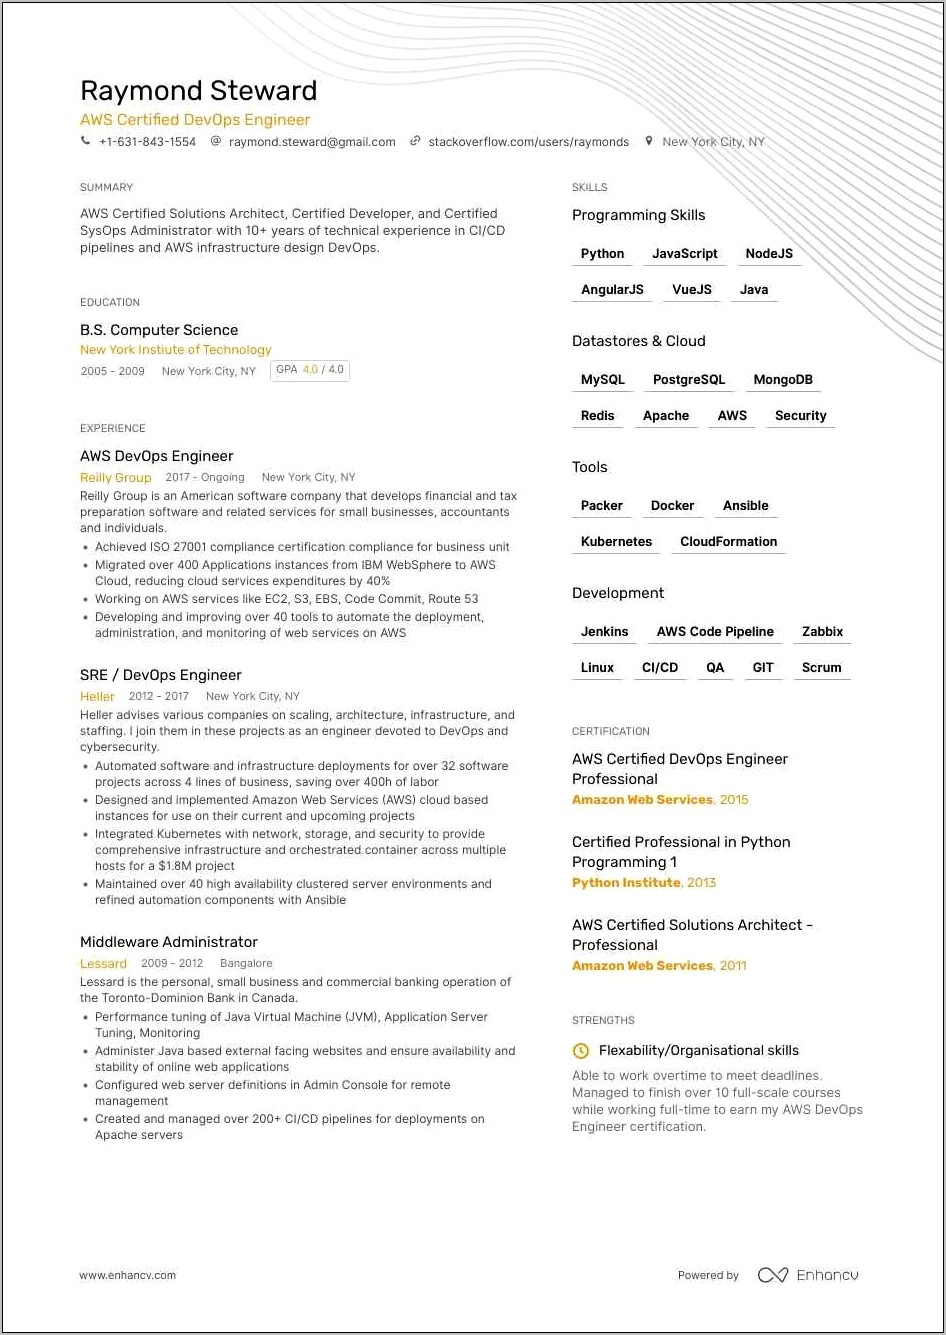 Resume Objective Statement Examples Aws Engineer